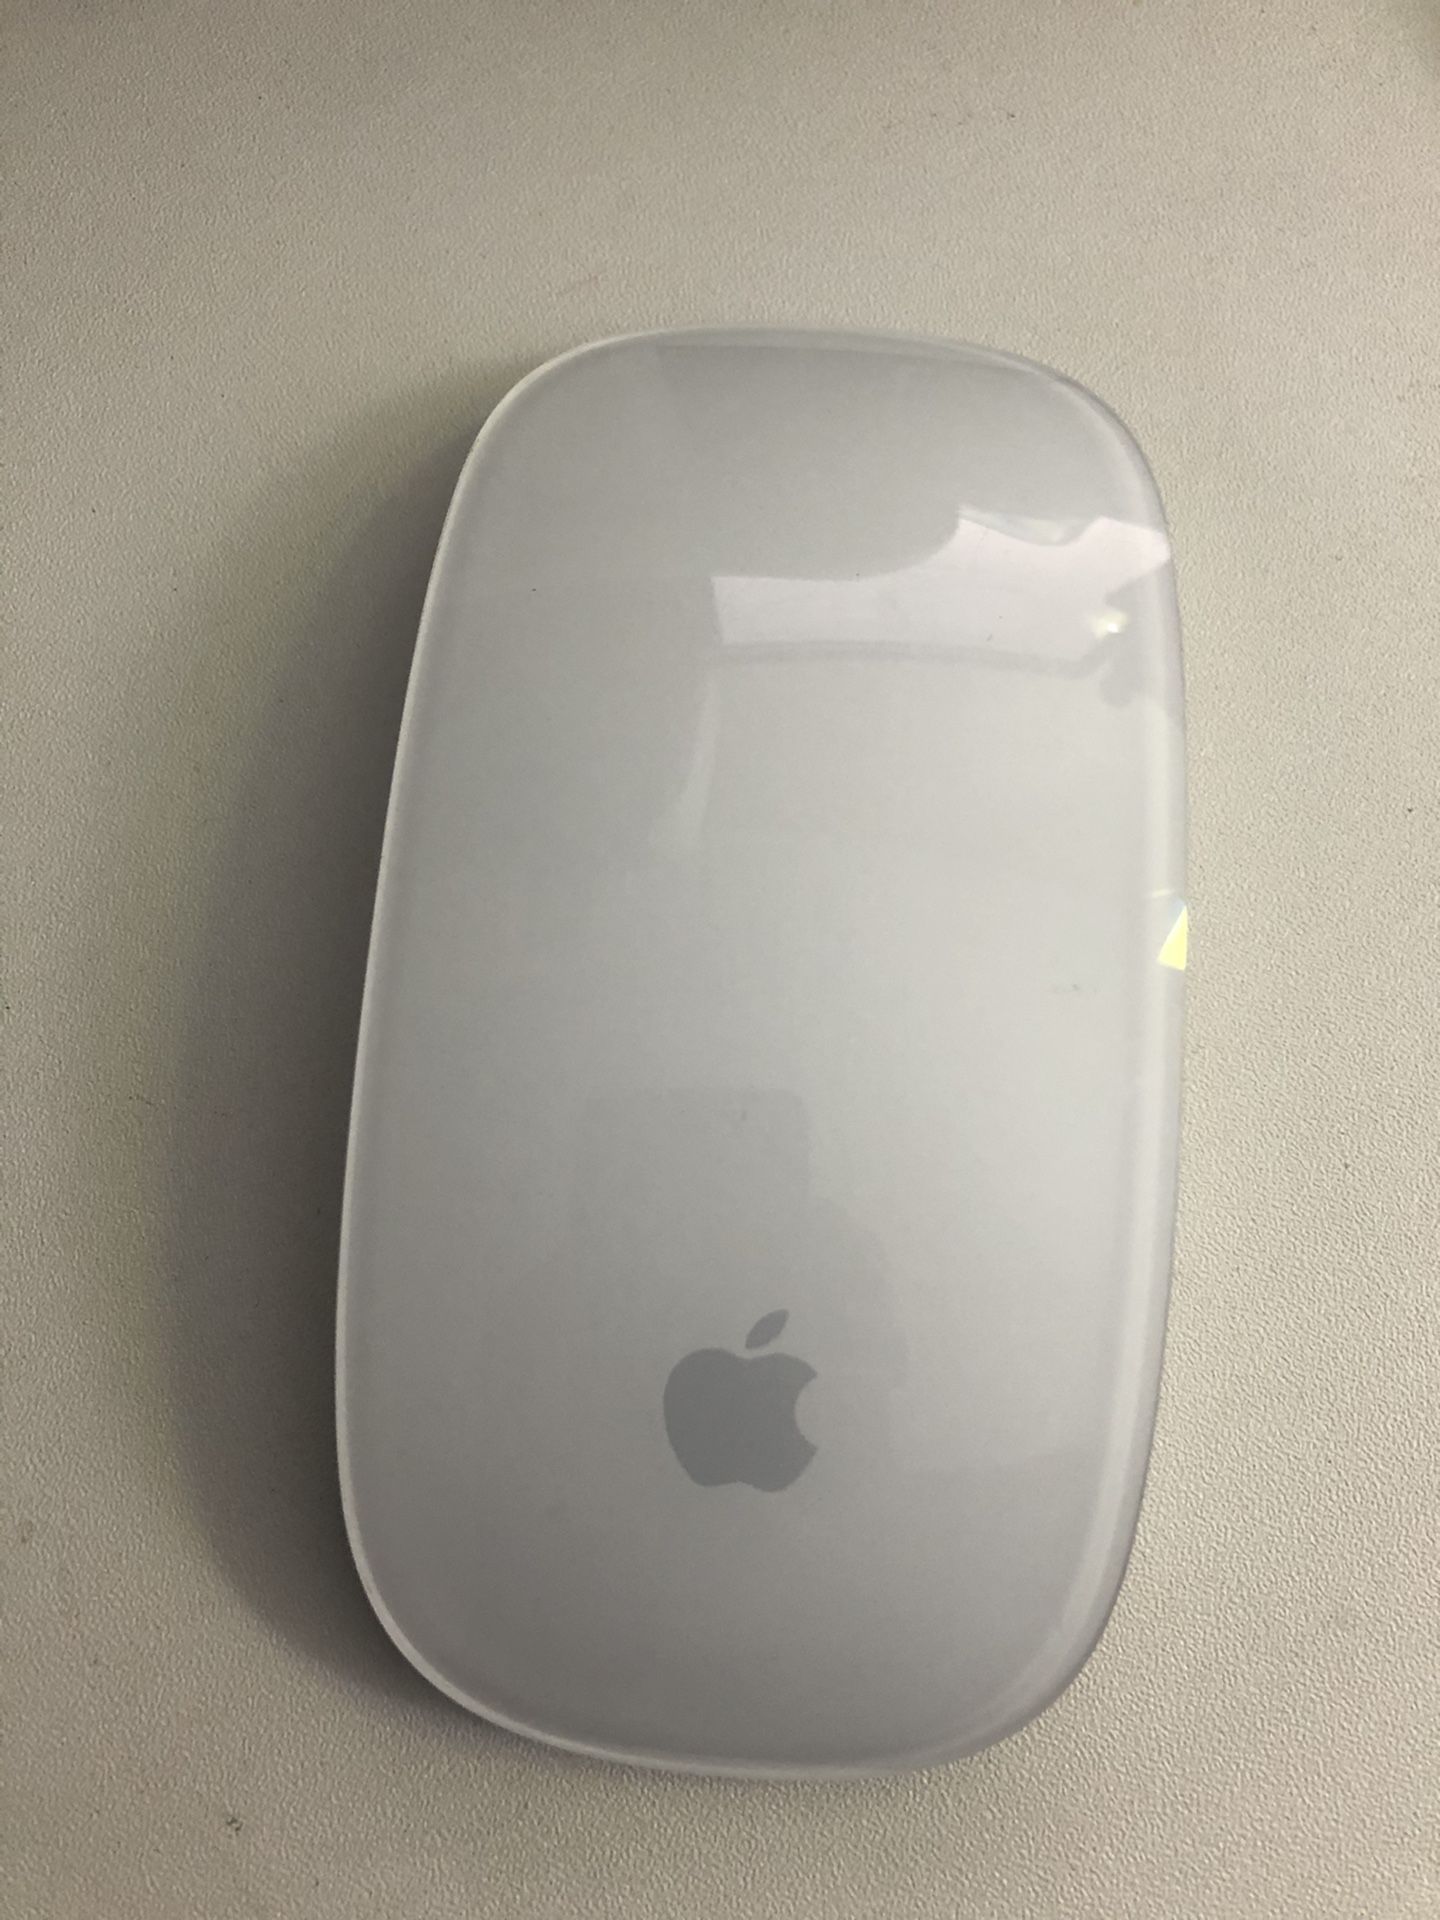 Apple Magic Mouse 1 (A1296) Bluetooth Wireless Laser Mouse - Silver